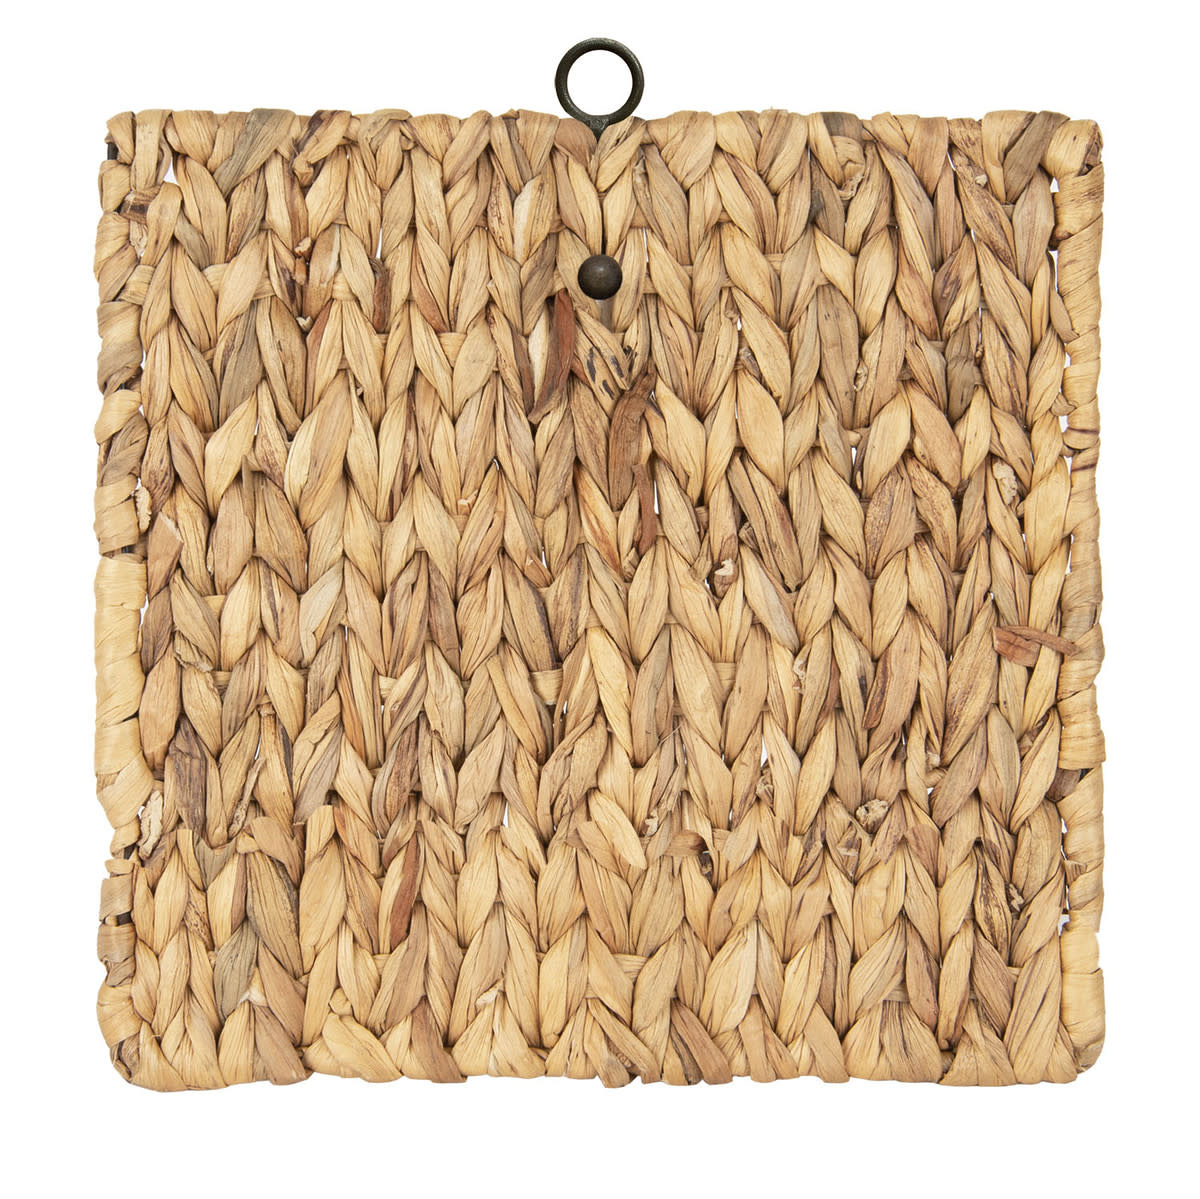 the round top collection Wicker Wall Display Board